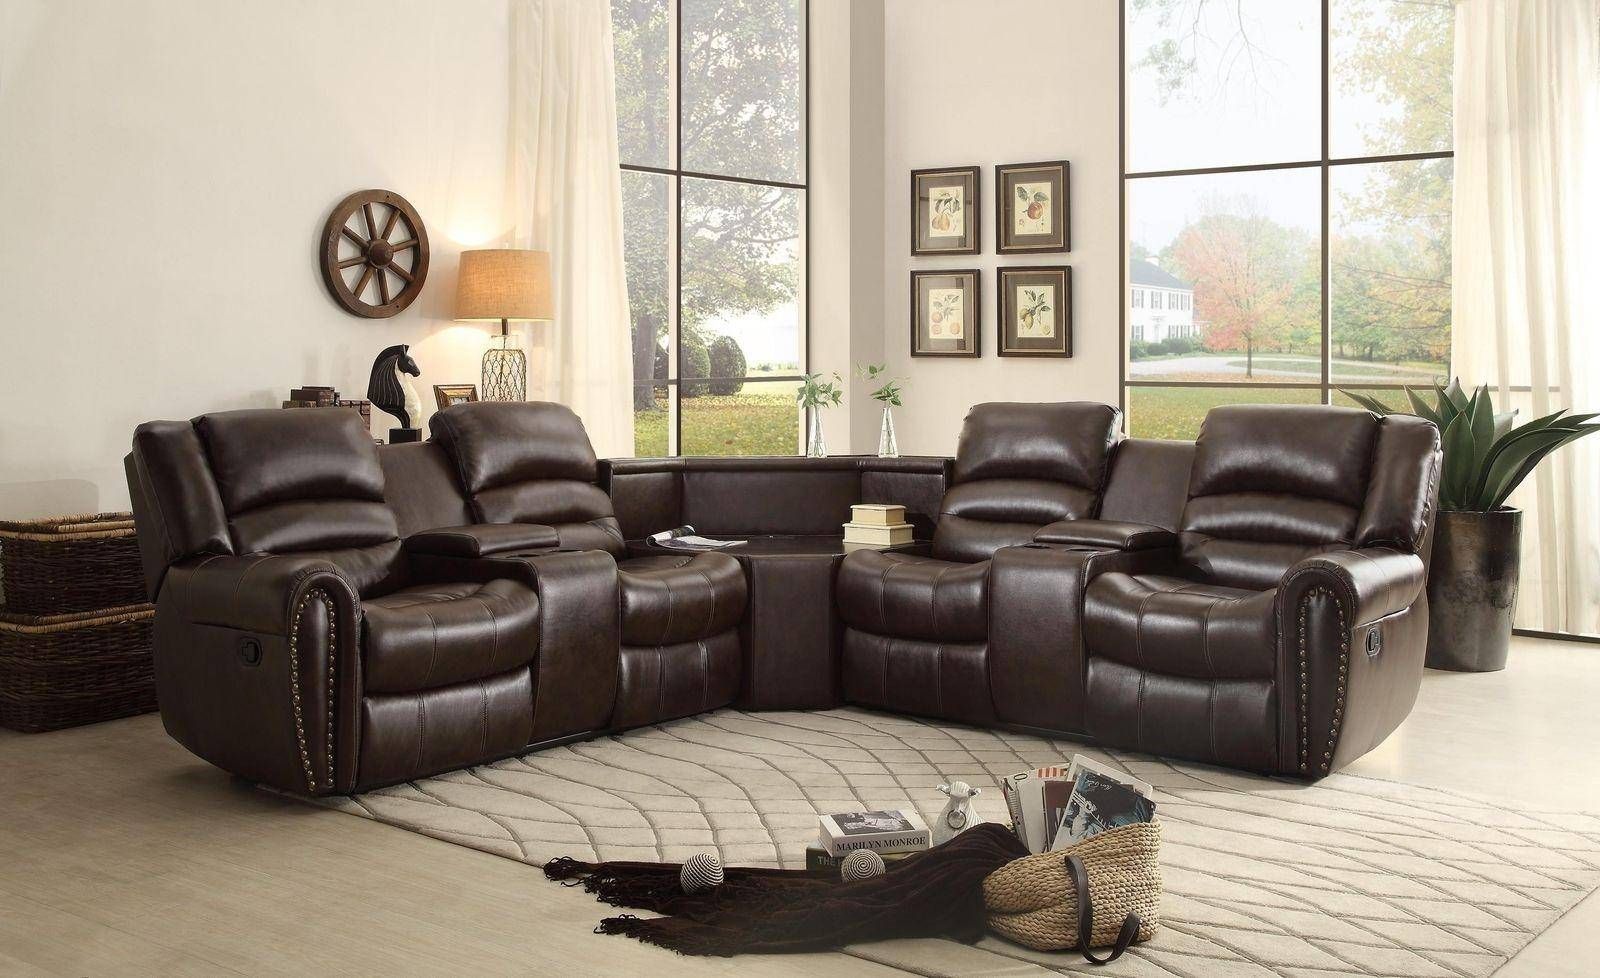 Homelegance Palmyra Brown Bonded Leather Reclining Pertaining To 3pc Bonded Leather Upholstered Wooden Sectional Sofas Brown (View 6 of 15)